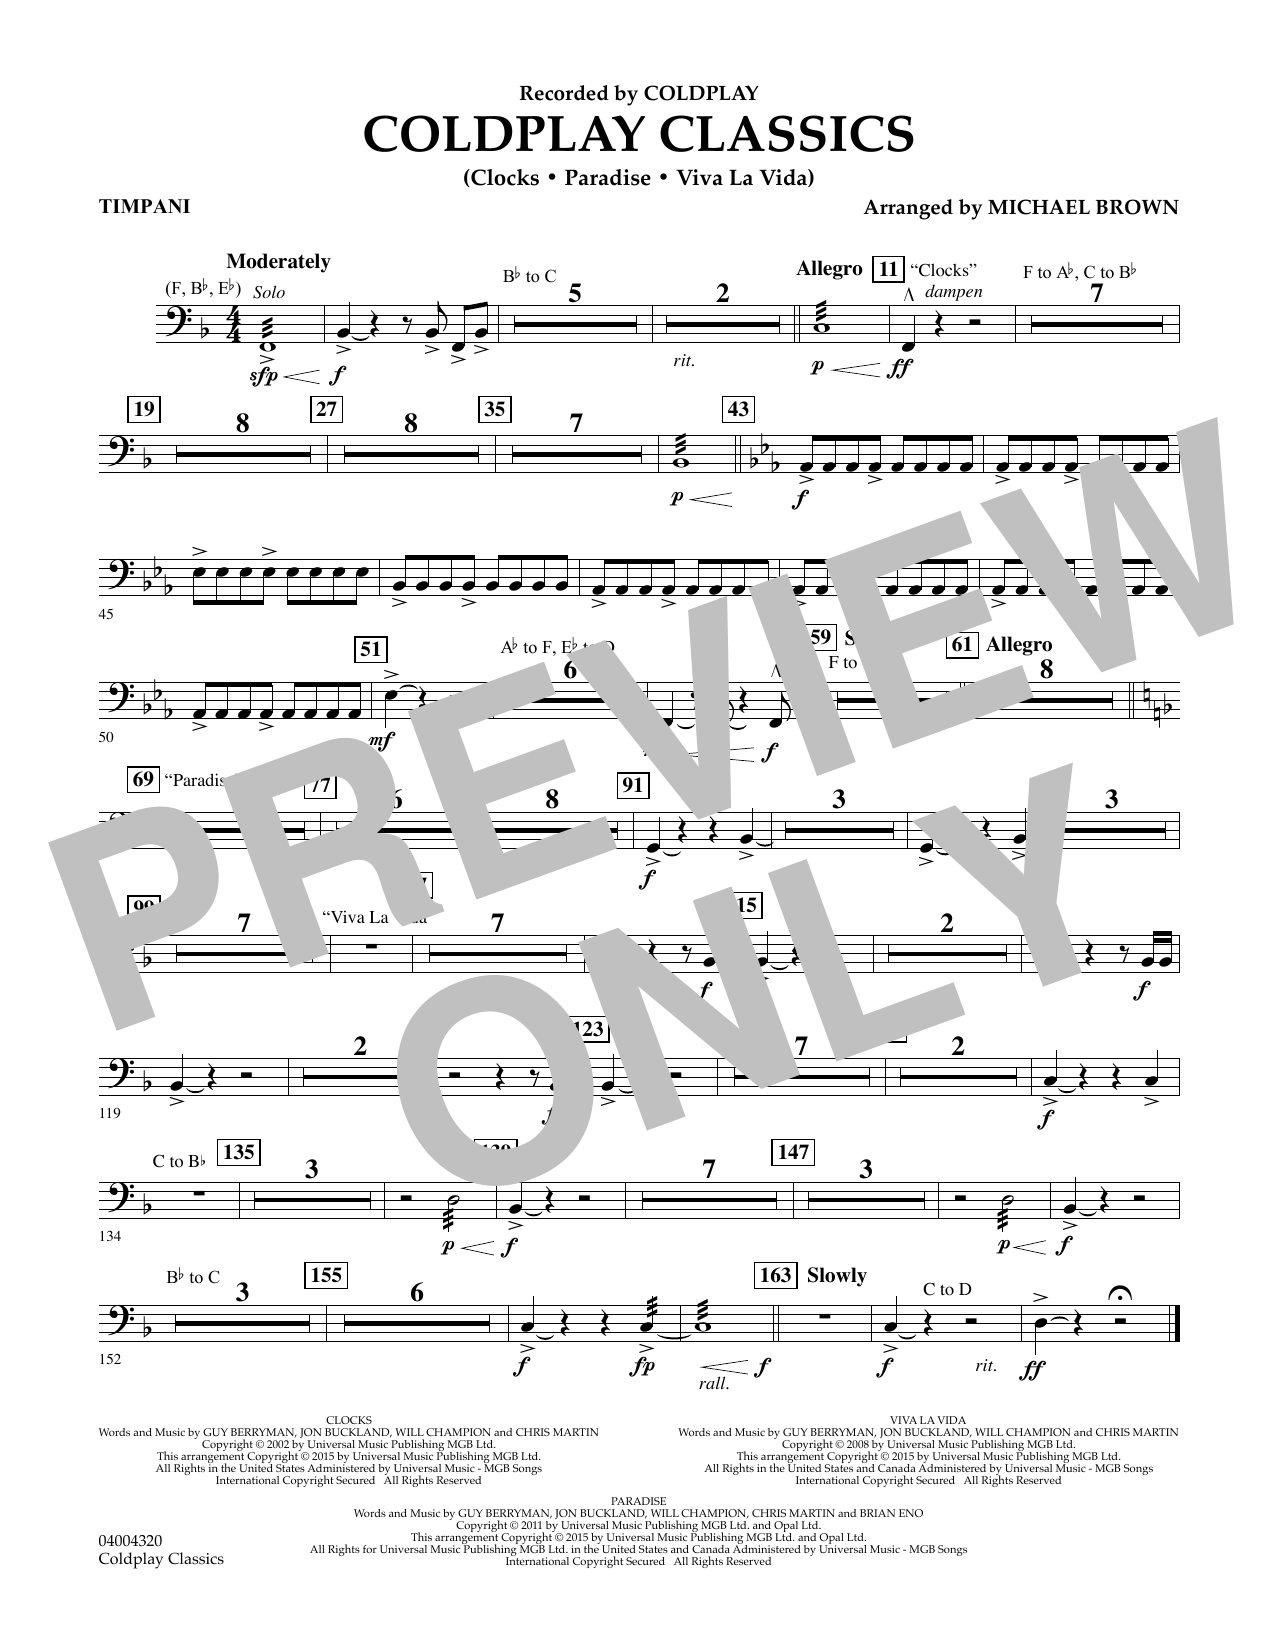 Michael Brown Coldplay Classics - Timpani sheet music notes and chords. Download Printable PDF.